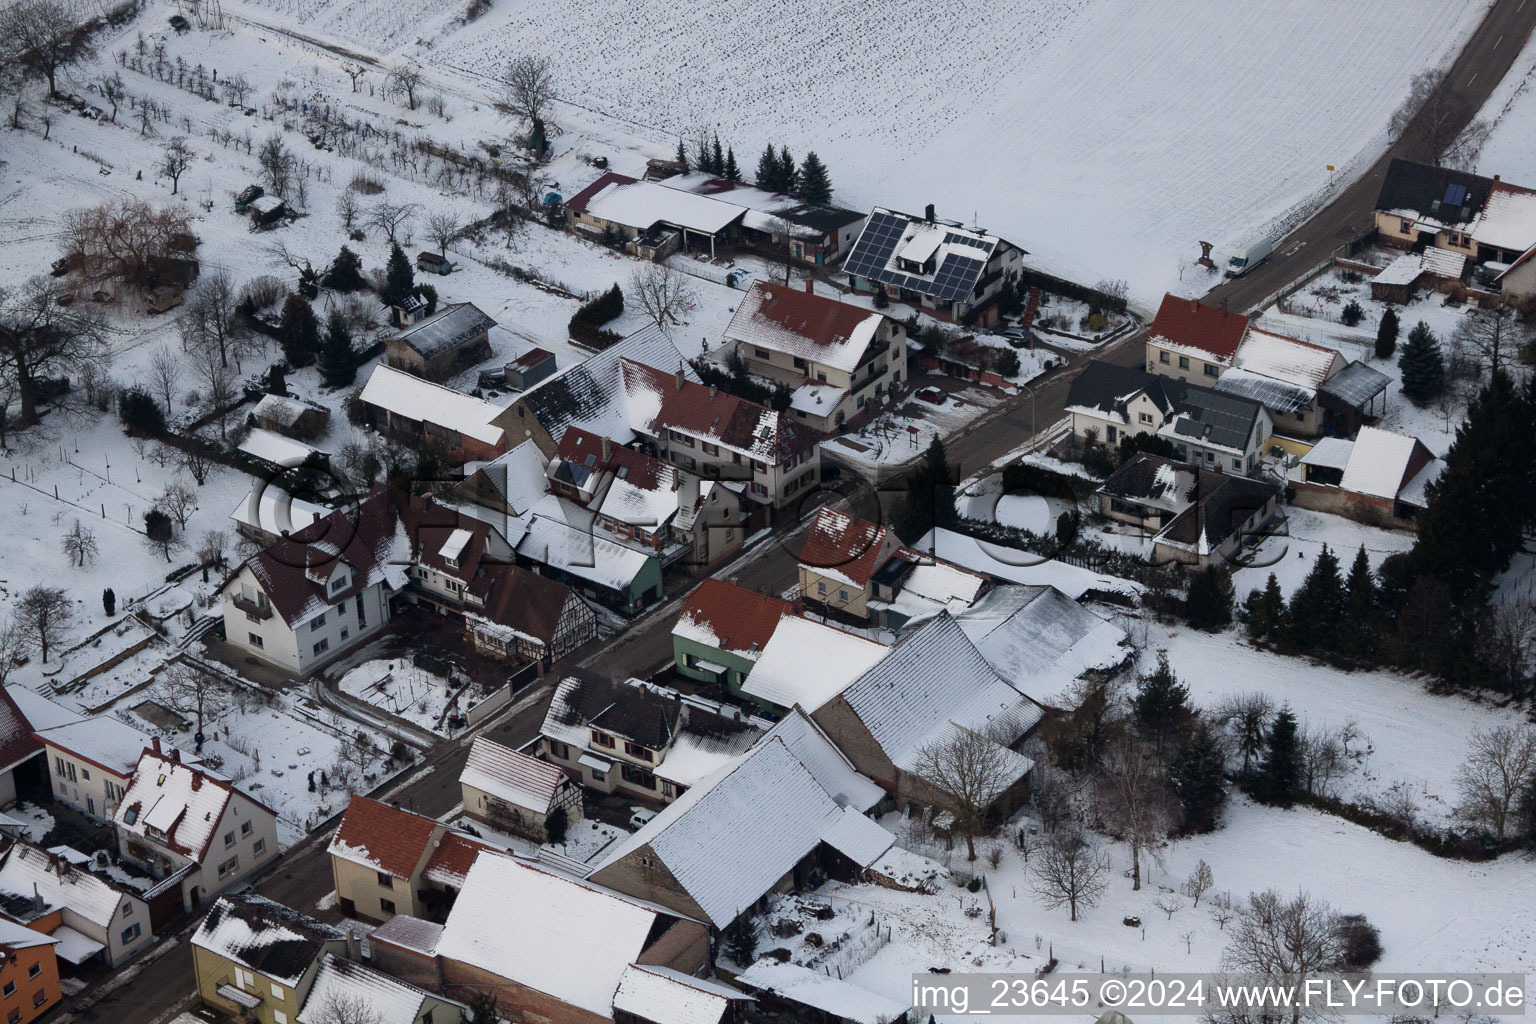 In the snow in winter in the district Kleinsteinfeld in Niederotterbach in the state Rhineland-Palatinate, Germany from above